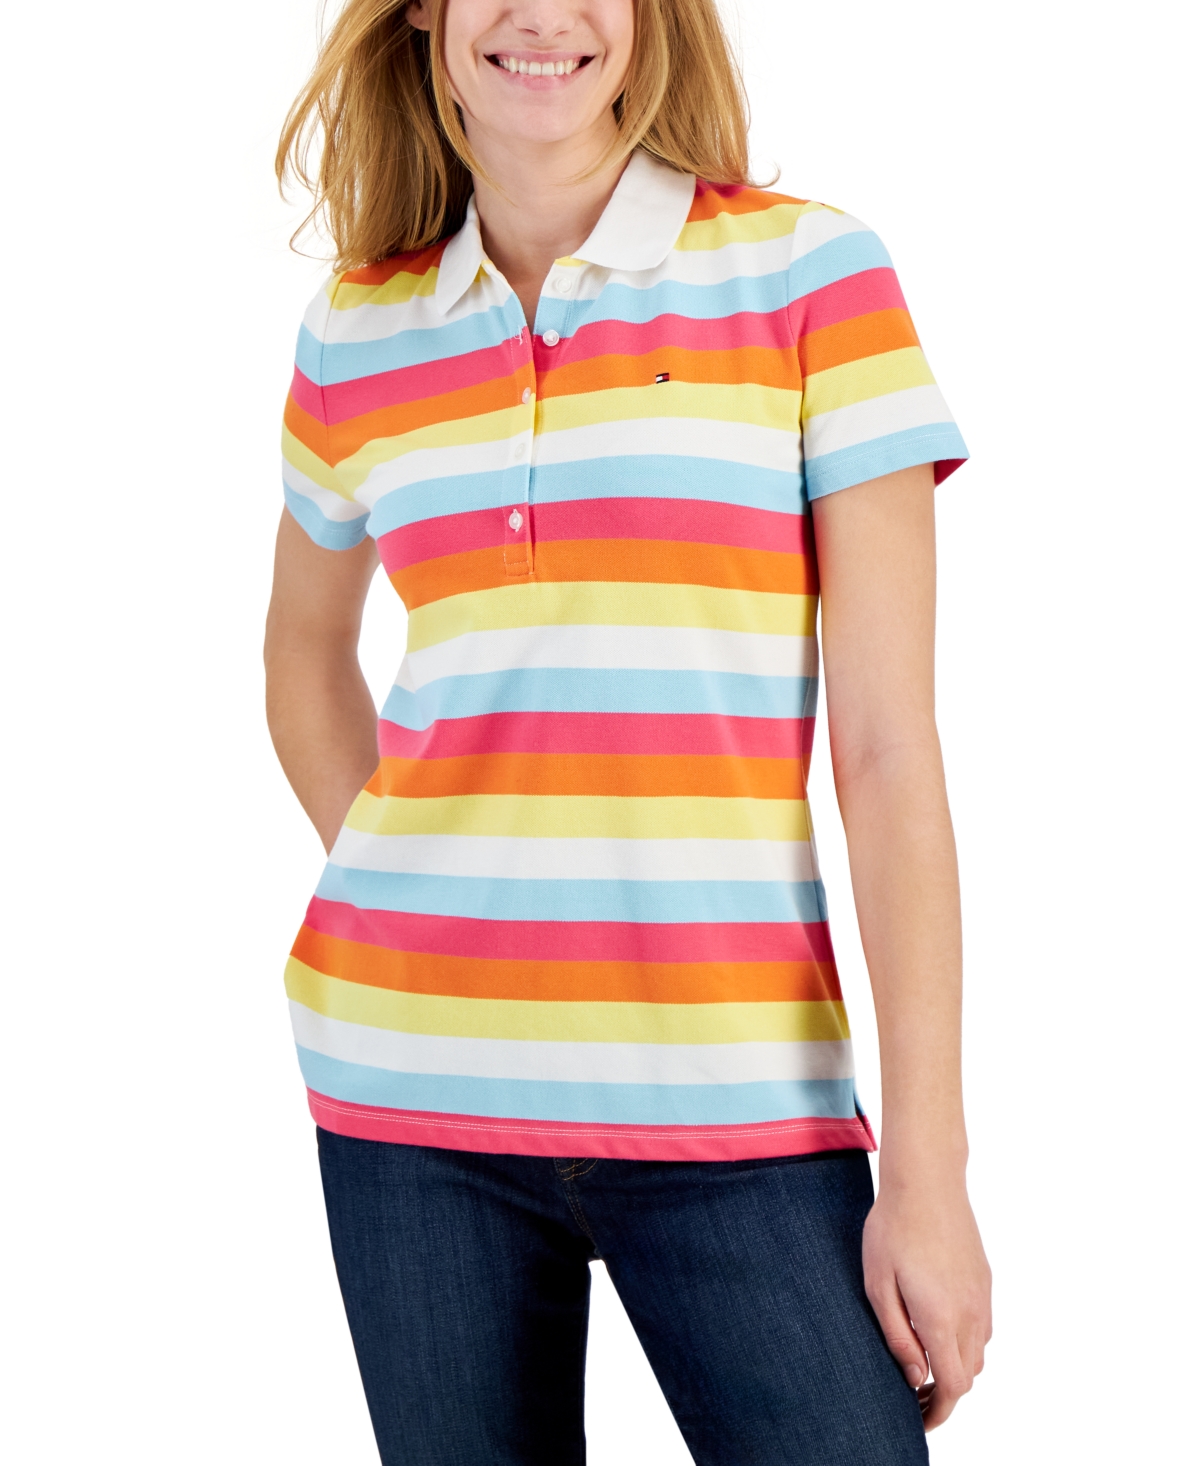 Tommy Hilfiger Women's Cotton Colorful Stripes Polo Shirt In Sky Captain,bright White